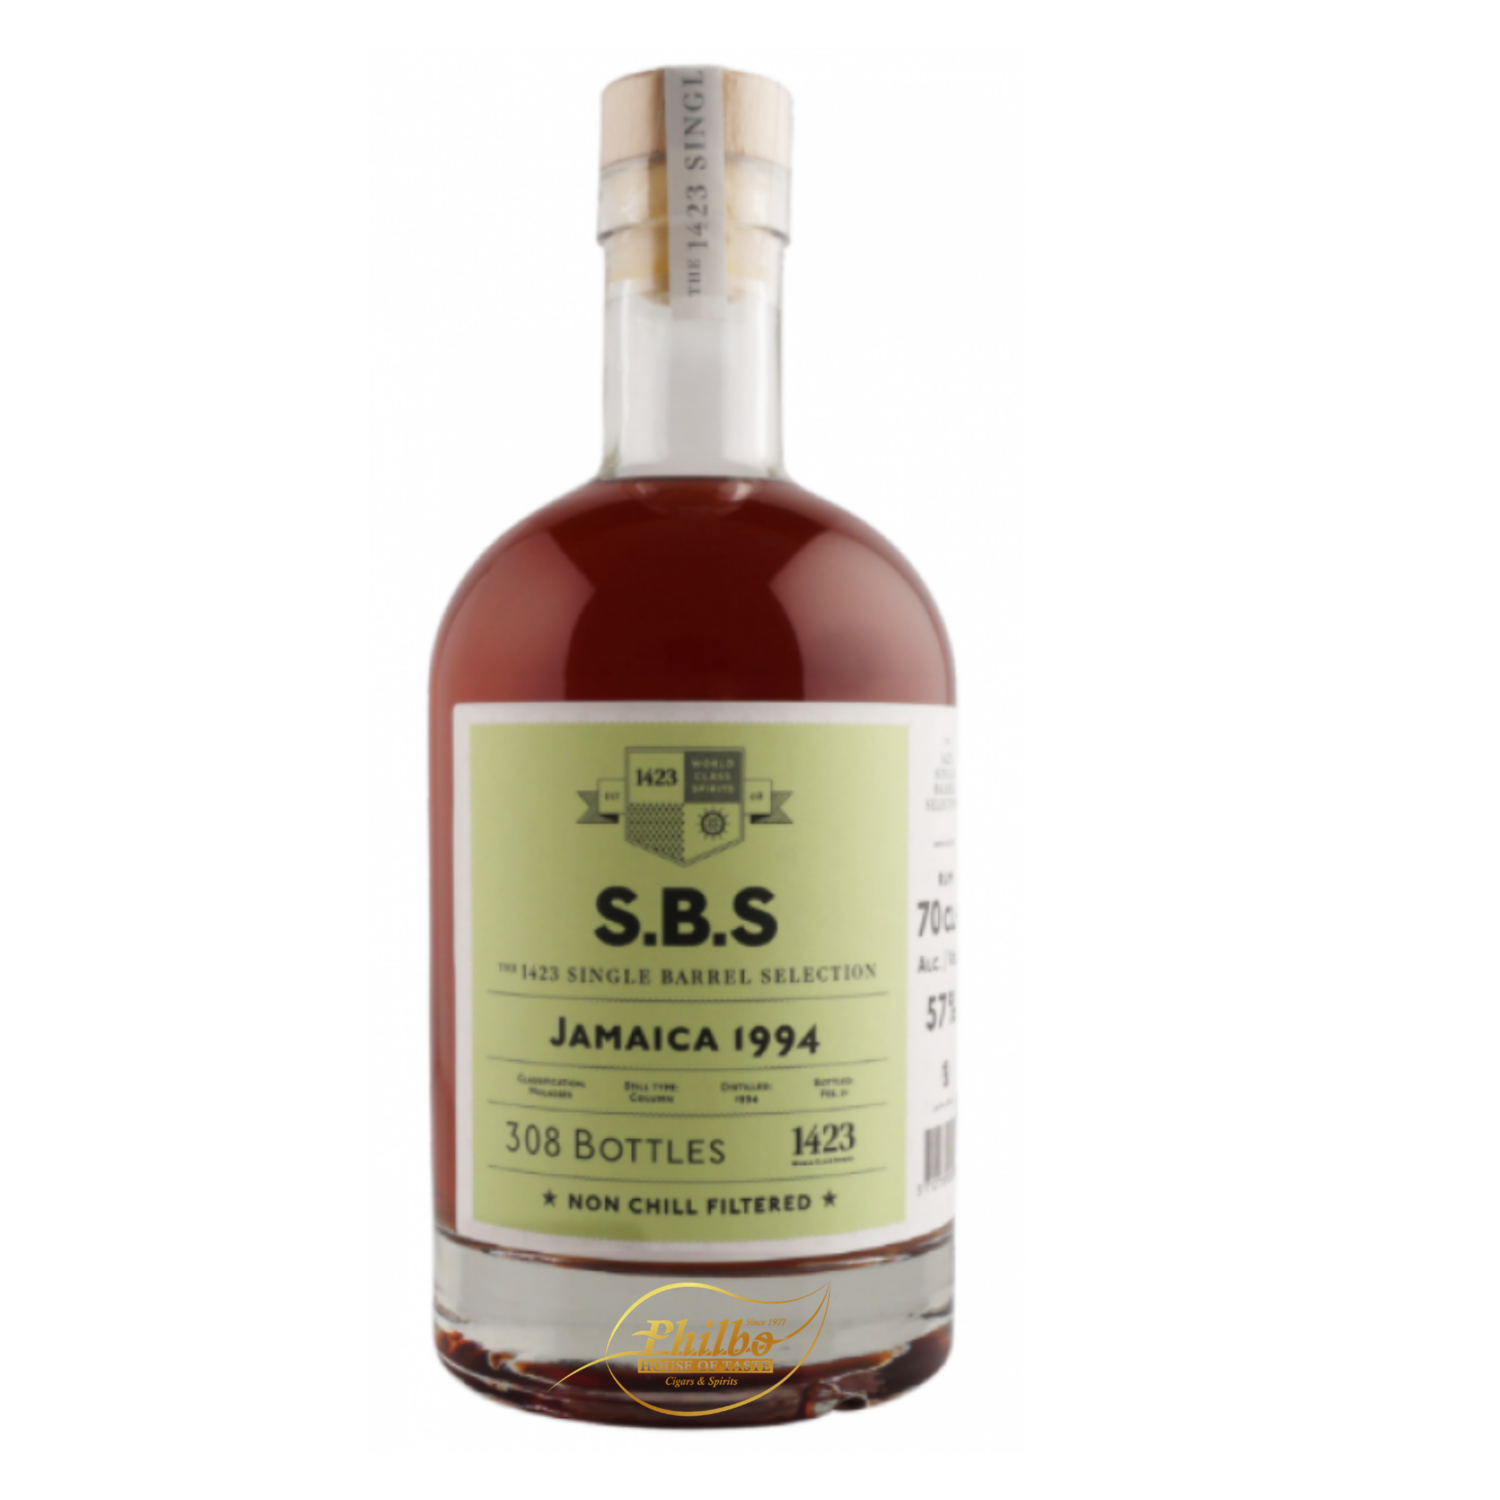 SBS JAMAICA 1994 RUM NEW YARMOUTH ROM 57% 70cl (308 bottles)